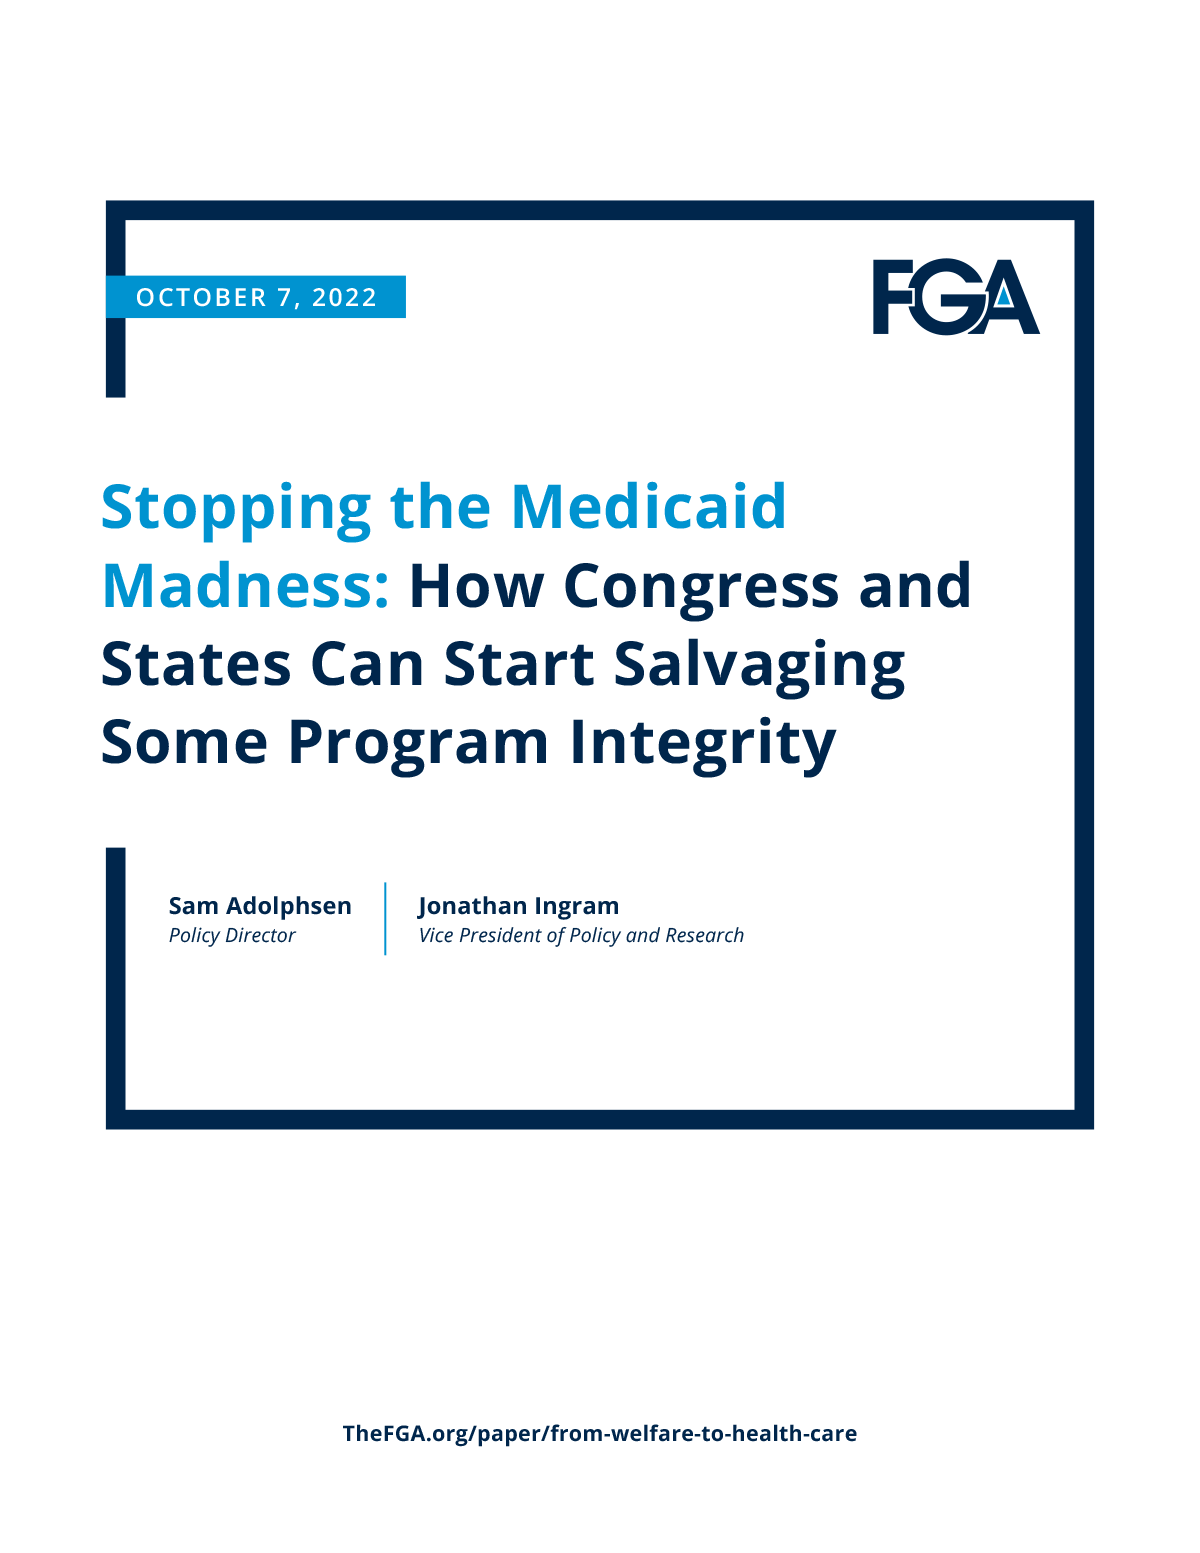 Stopping the Medicaid Madness: How Congress and States Can Start Salvaging Some Program Integrity